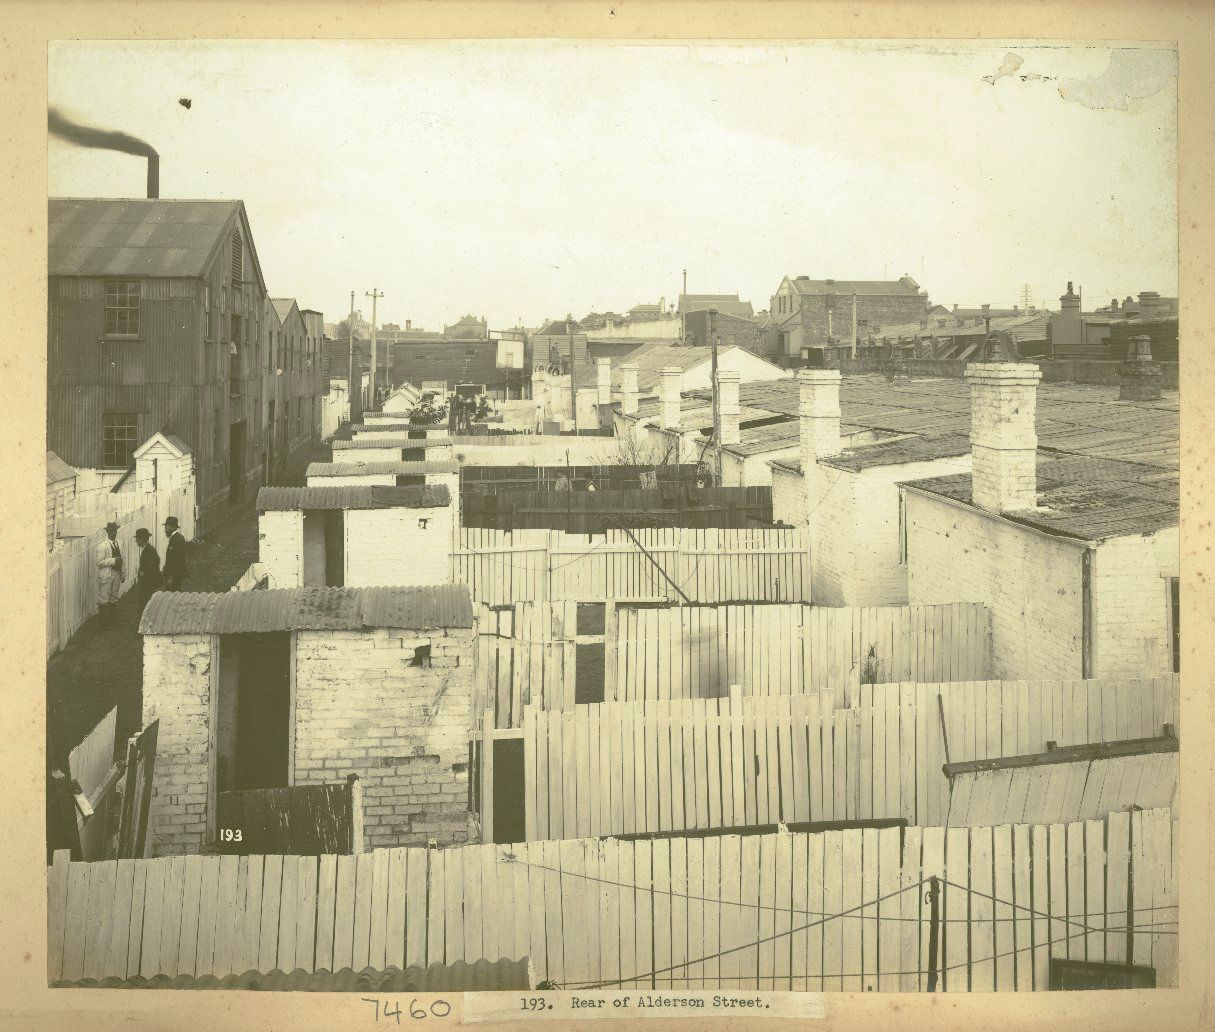 A long row of uniform backyards with white fences and outdoor lavatories. Three men stand in the laneway